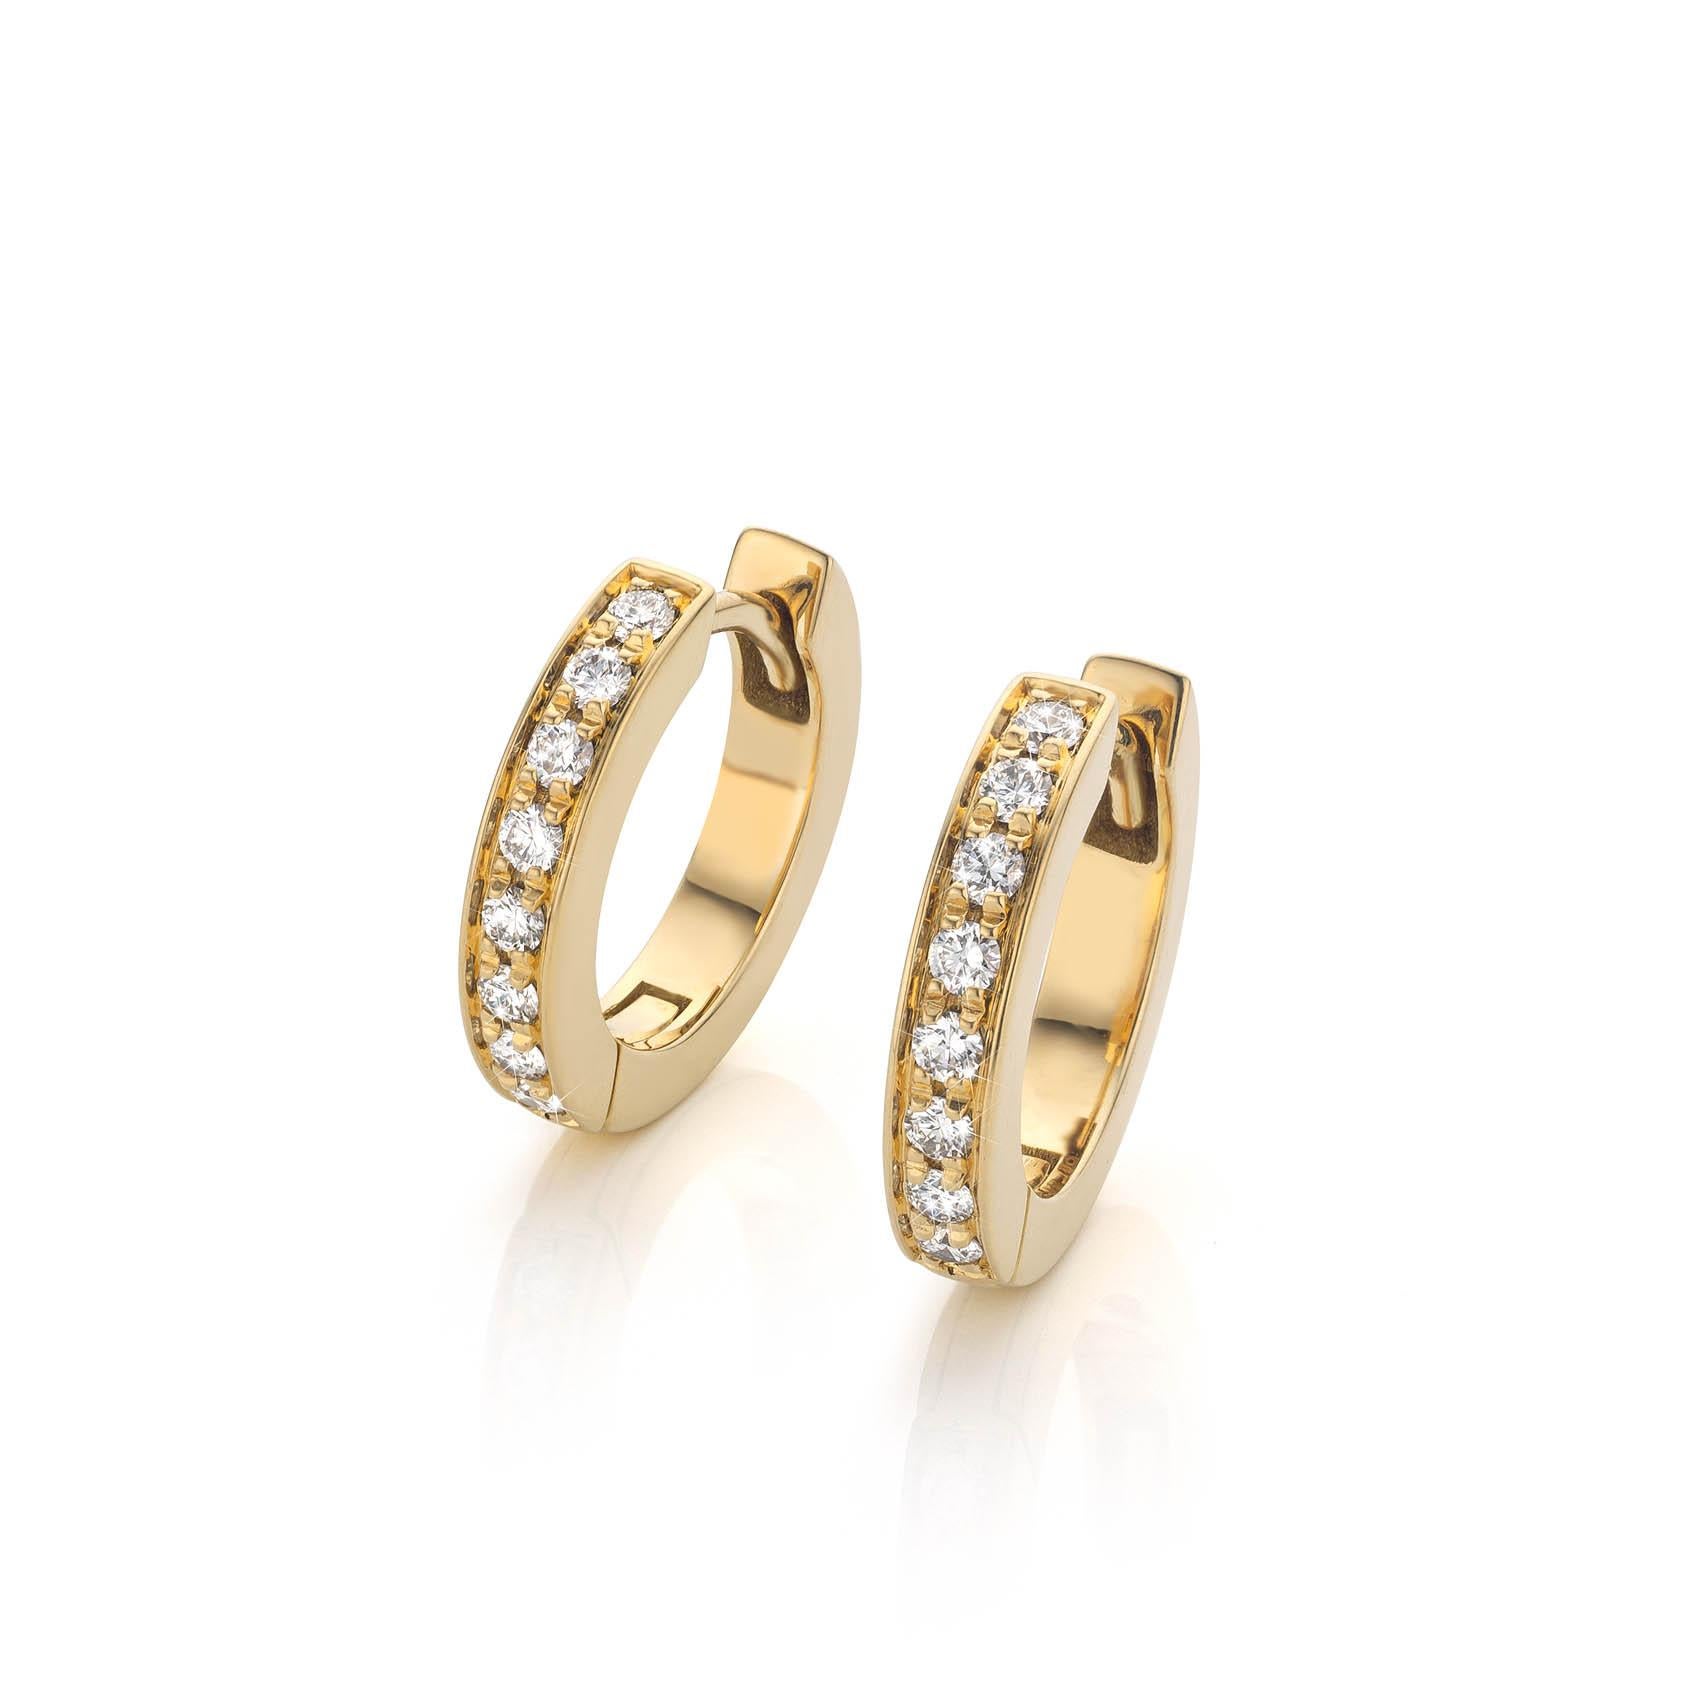 These are 14 Carat yellow gold earrings with in each earring 8 x 0,01 ct. Brilliant-cut Diamonds.

Technical specifications:
- These earrings are most of the times in stock and directly available!

- If they are unfortunatly sold out they can be